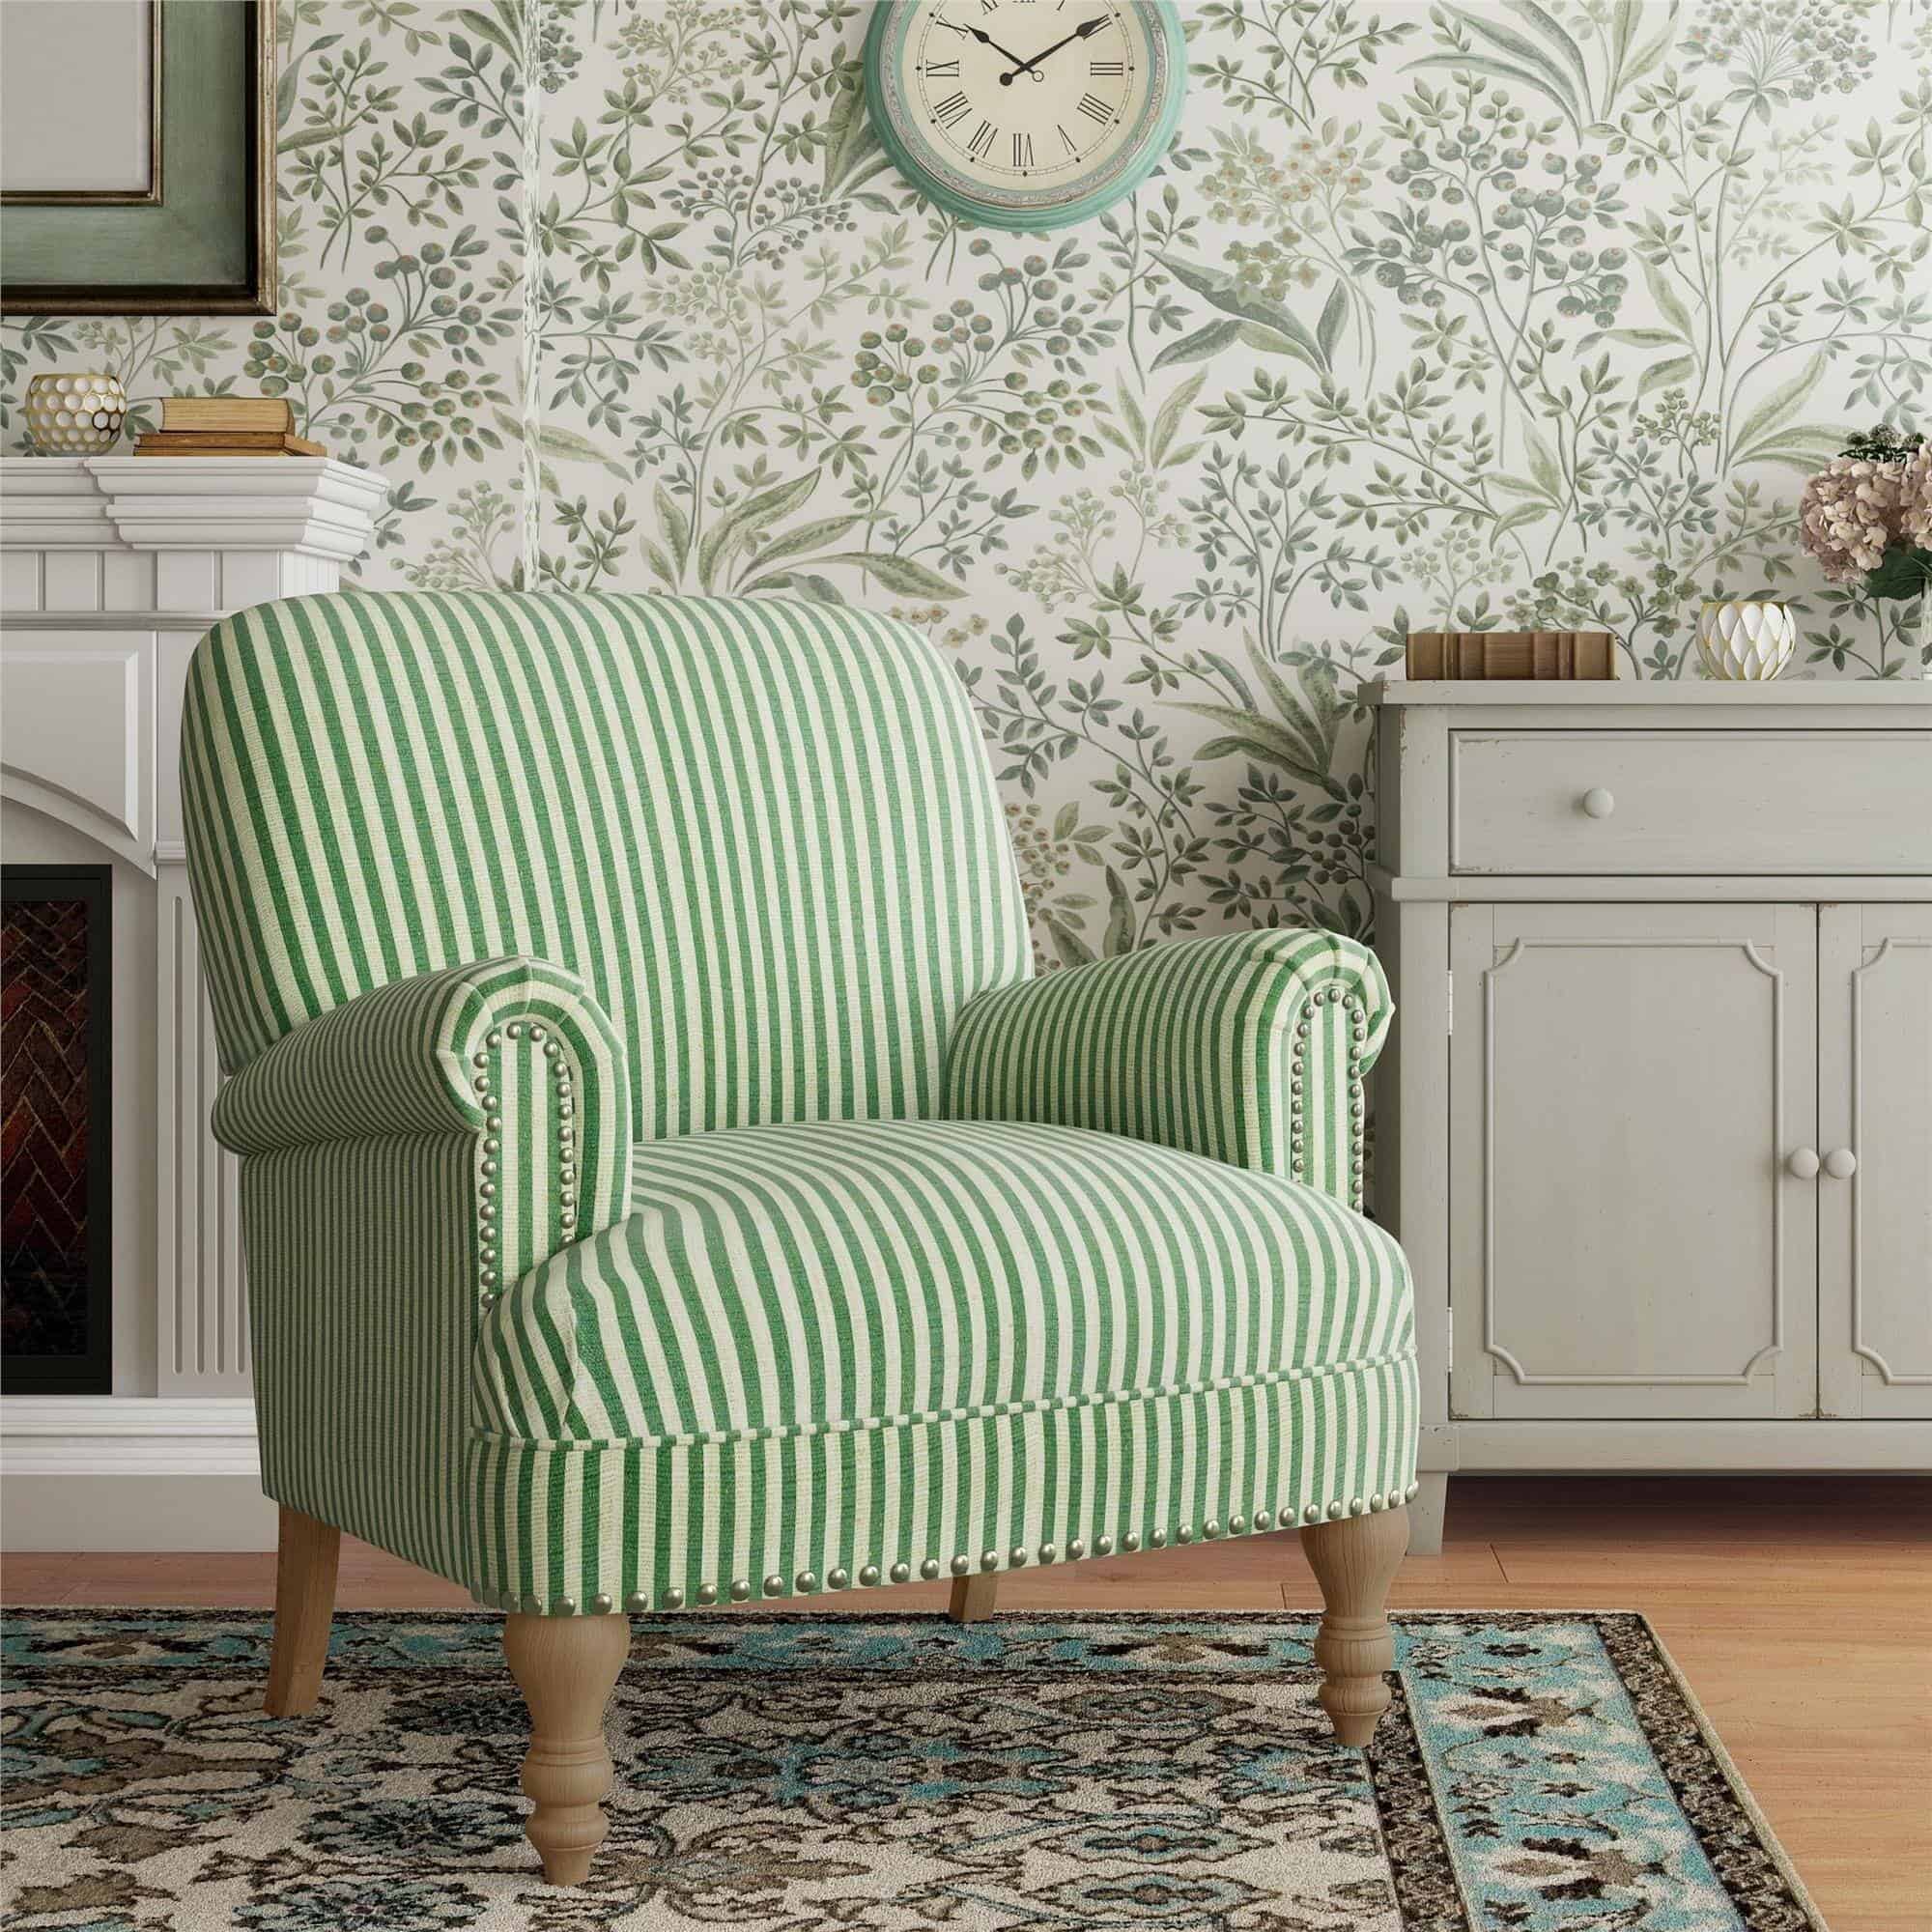 Achieve a Country Chic Look With This Striped Accent Chair